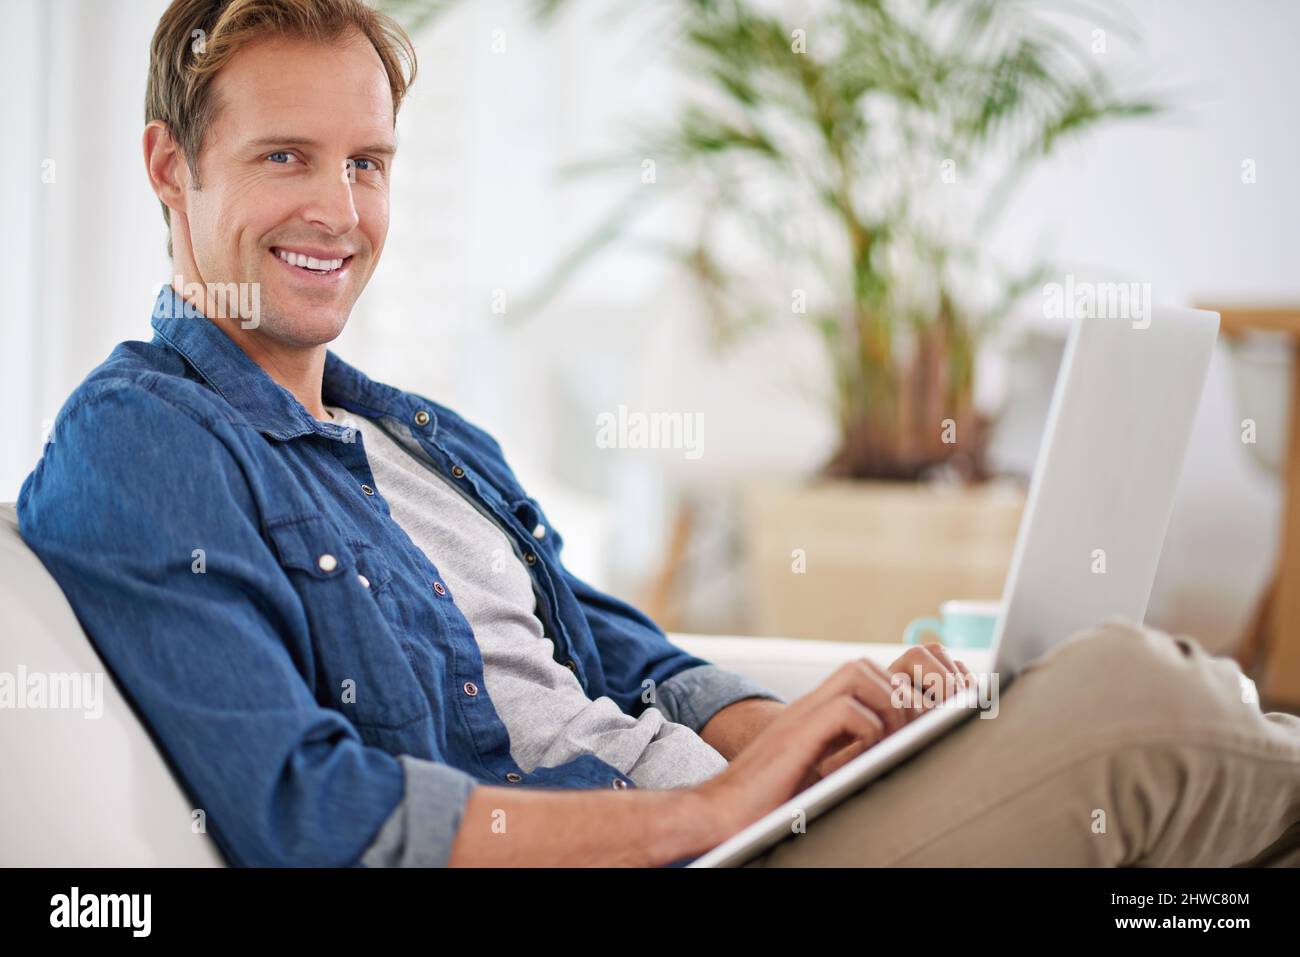 Lazy day with my laptop. Portrait of a handsome man using his laptop at home. Stock Photo